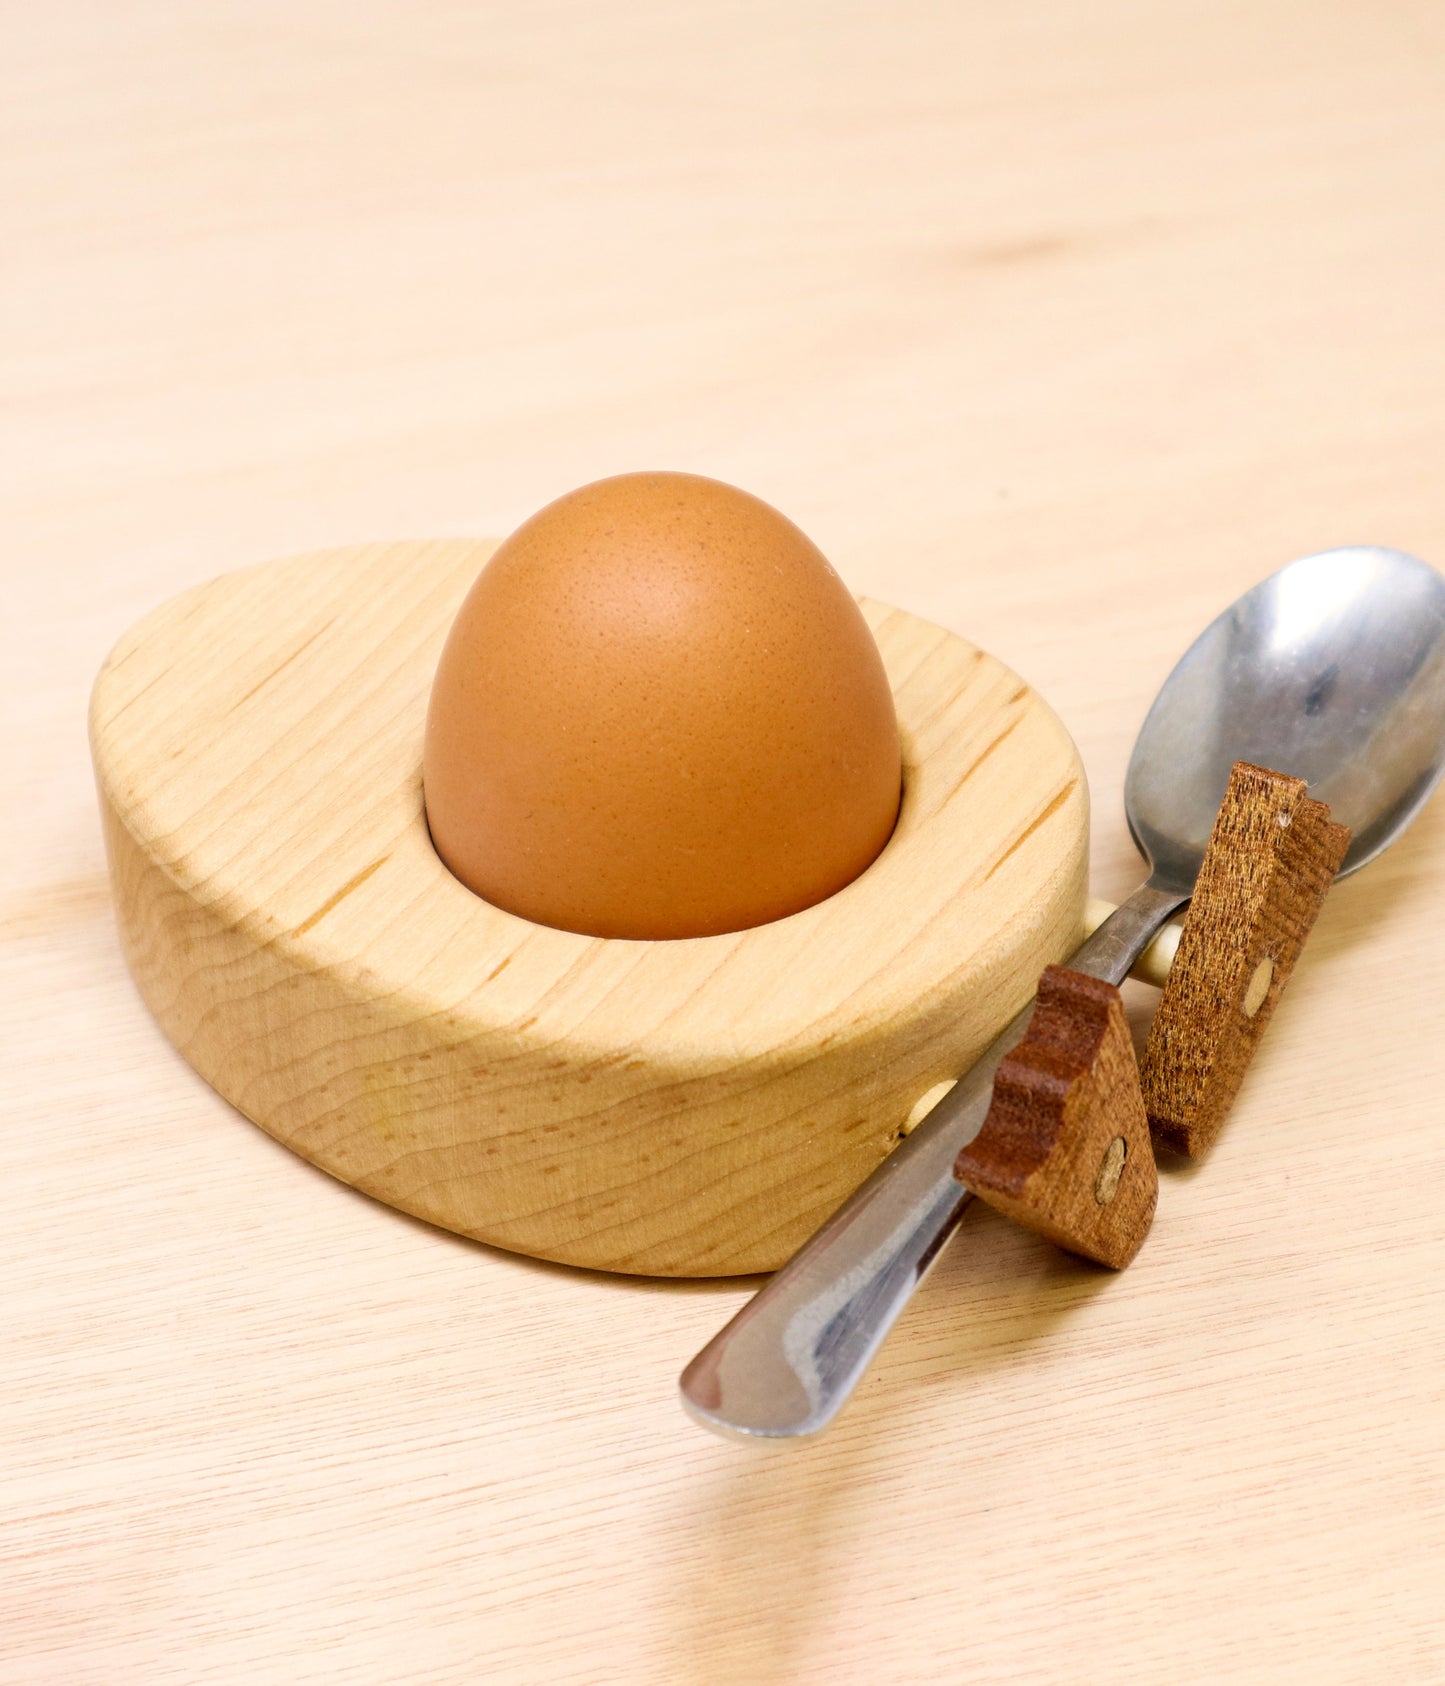 Eggy the Egg Cup Making Kit